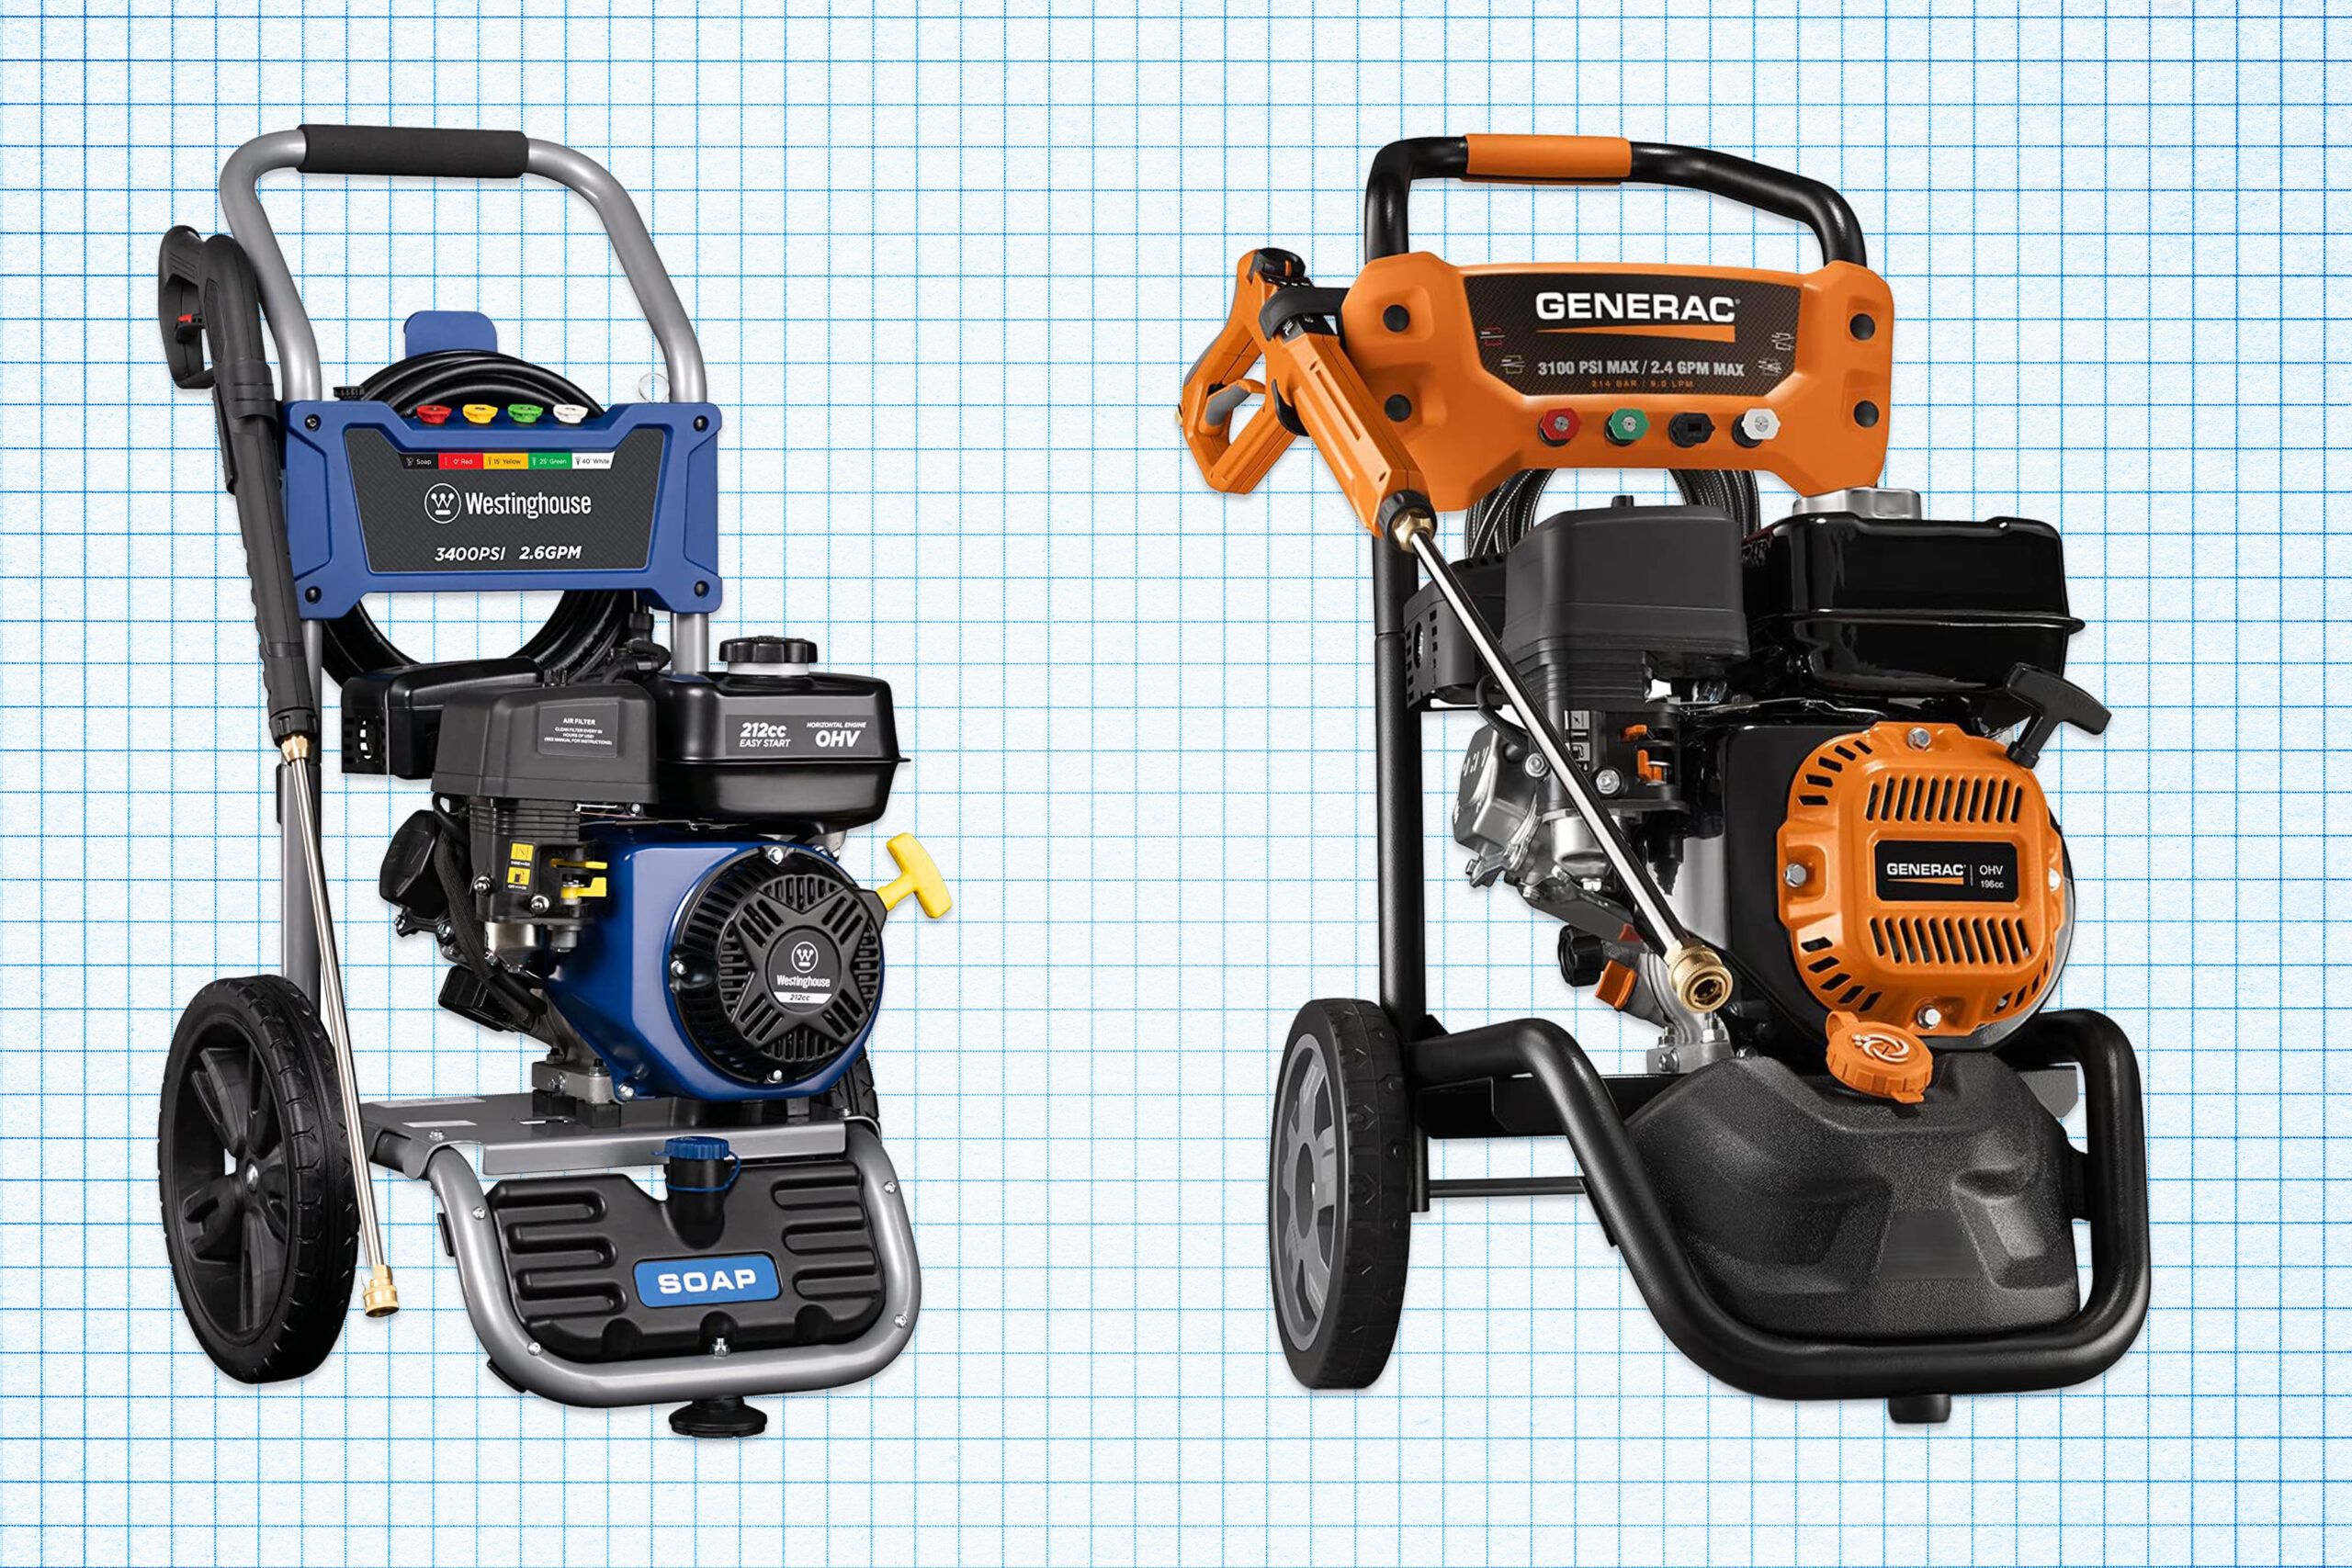 5 Power Washers Compared: Find the Best Pressure Washer for Your Needs